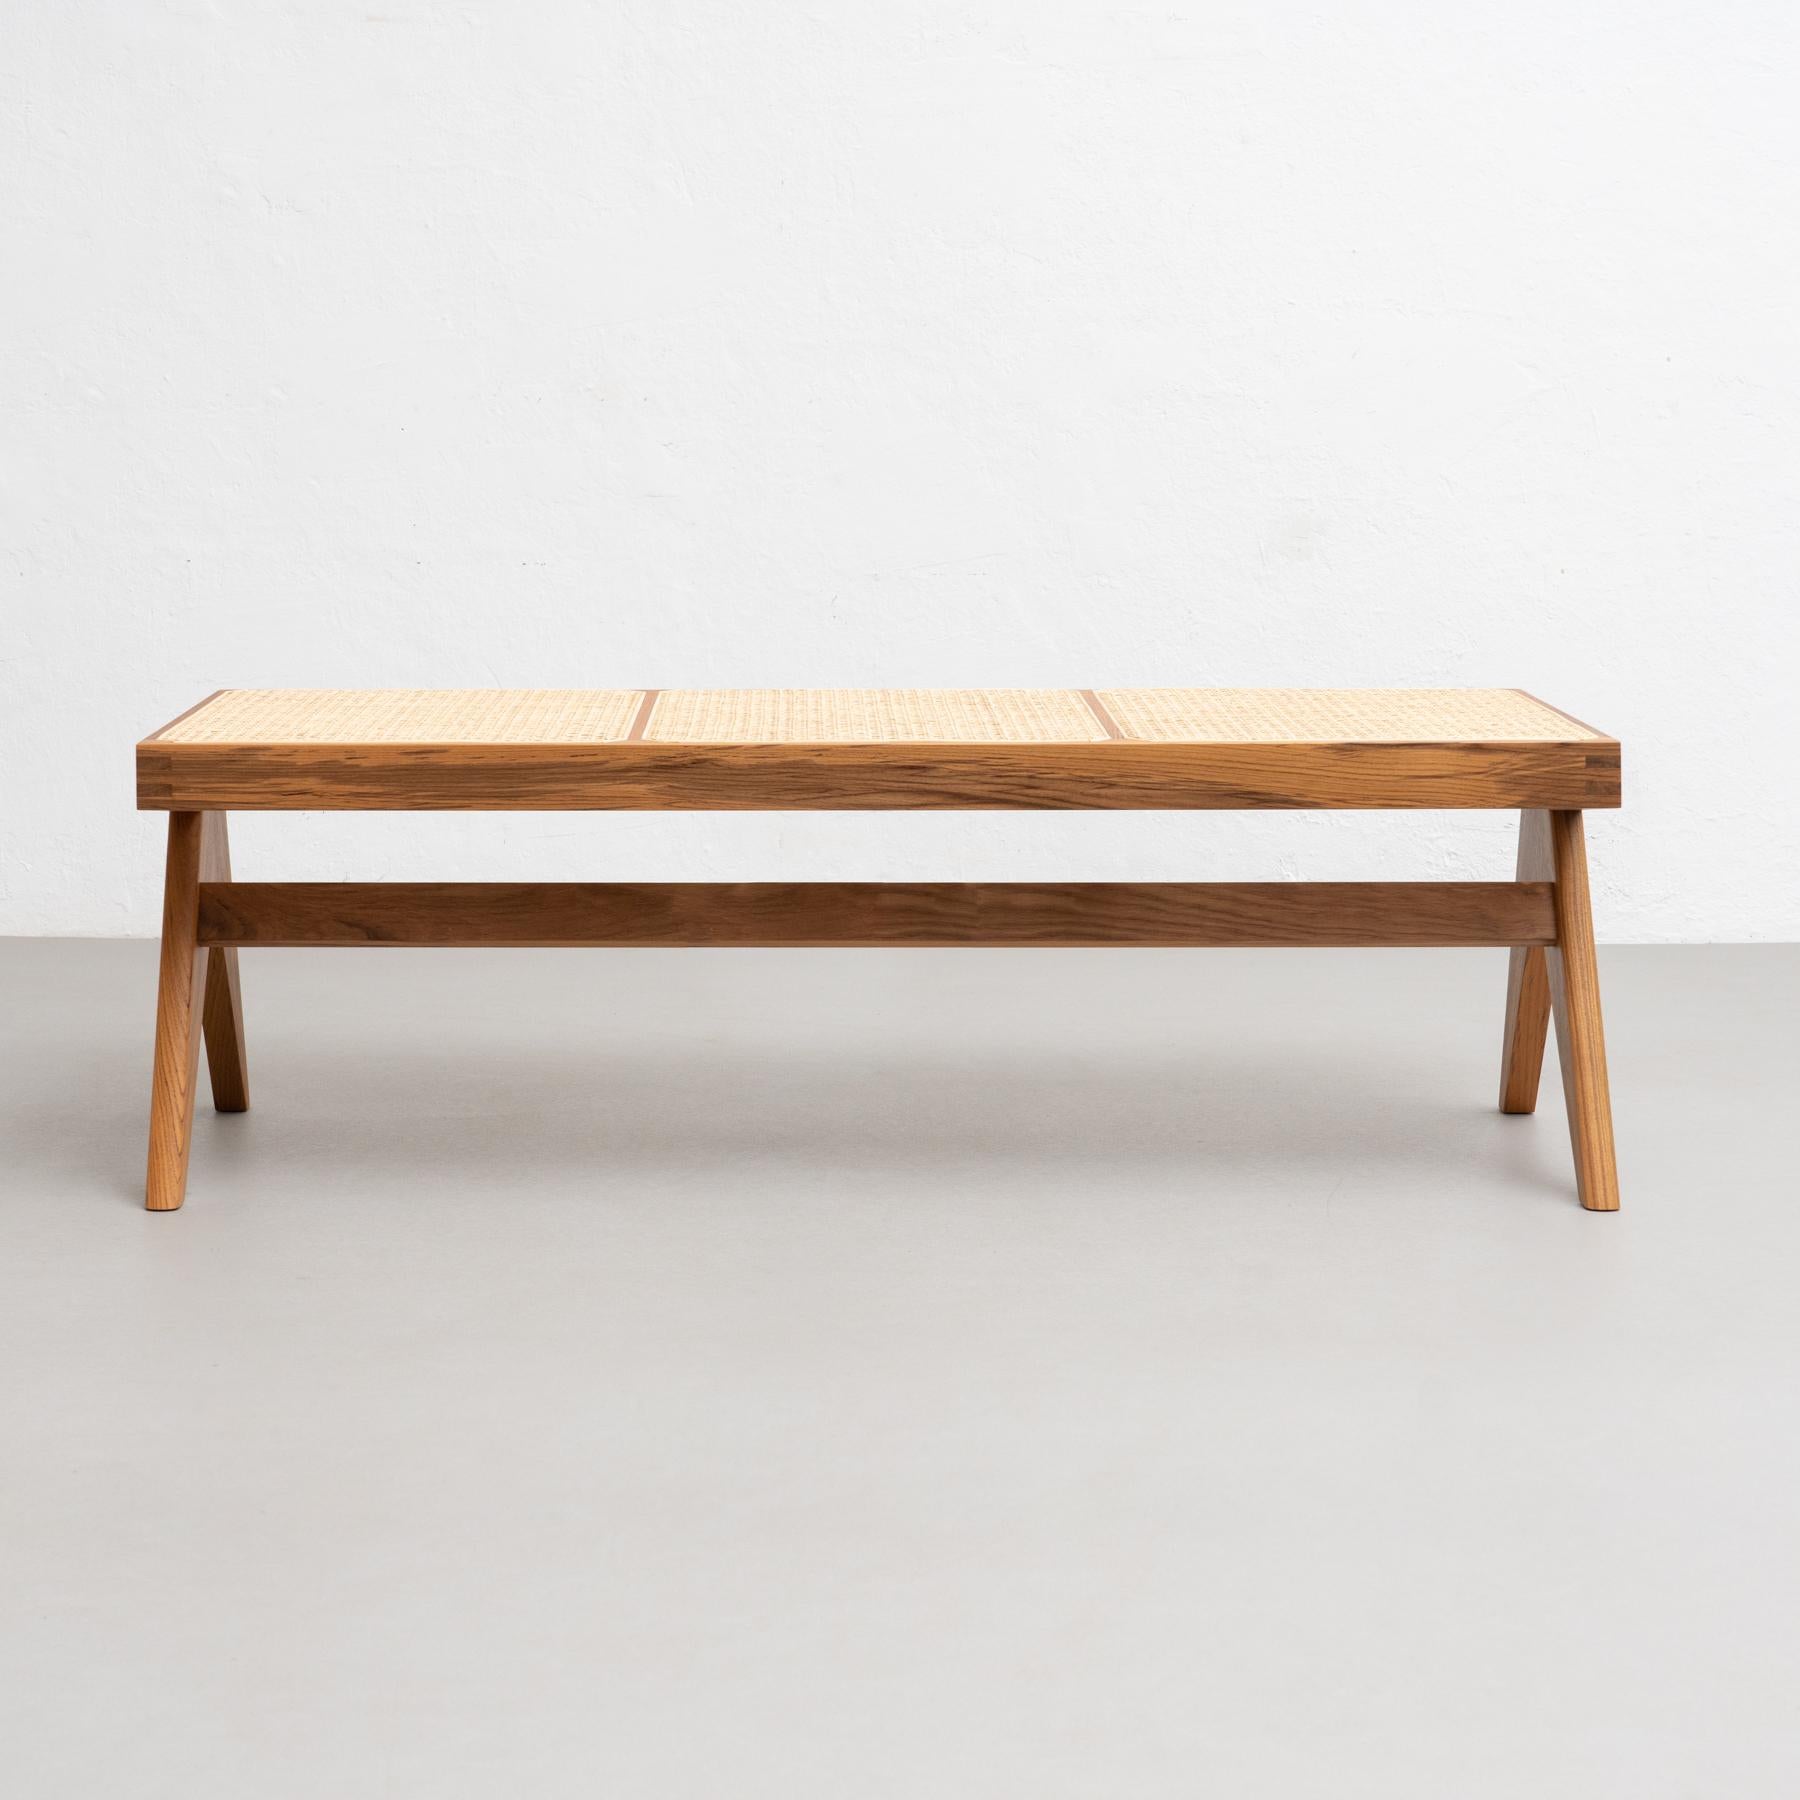 Pierre Jeanneret 057 Civil Bench, Wood and Woven Viennese Cane 1